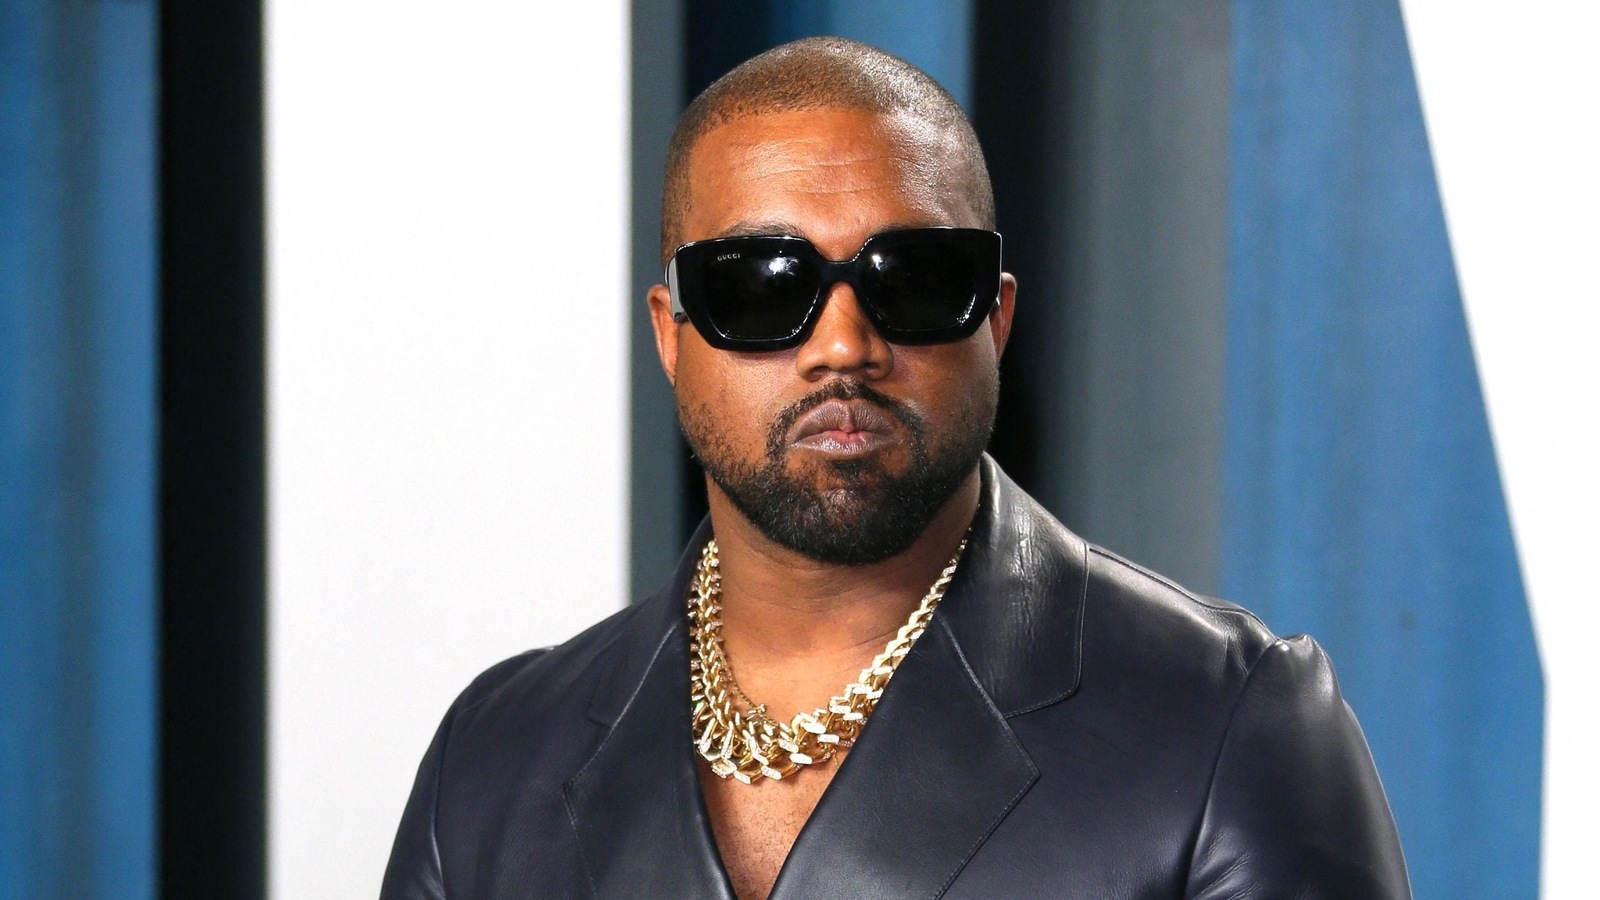 Kanye West is running for president in 2024 elections, wants Donald